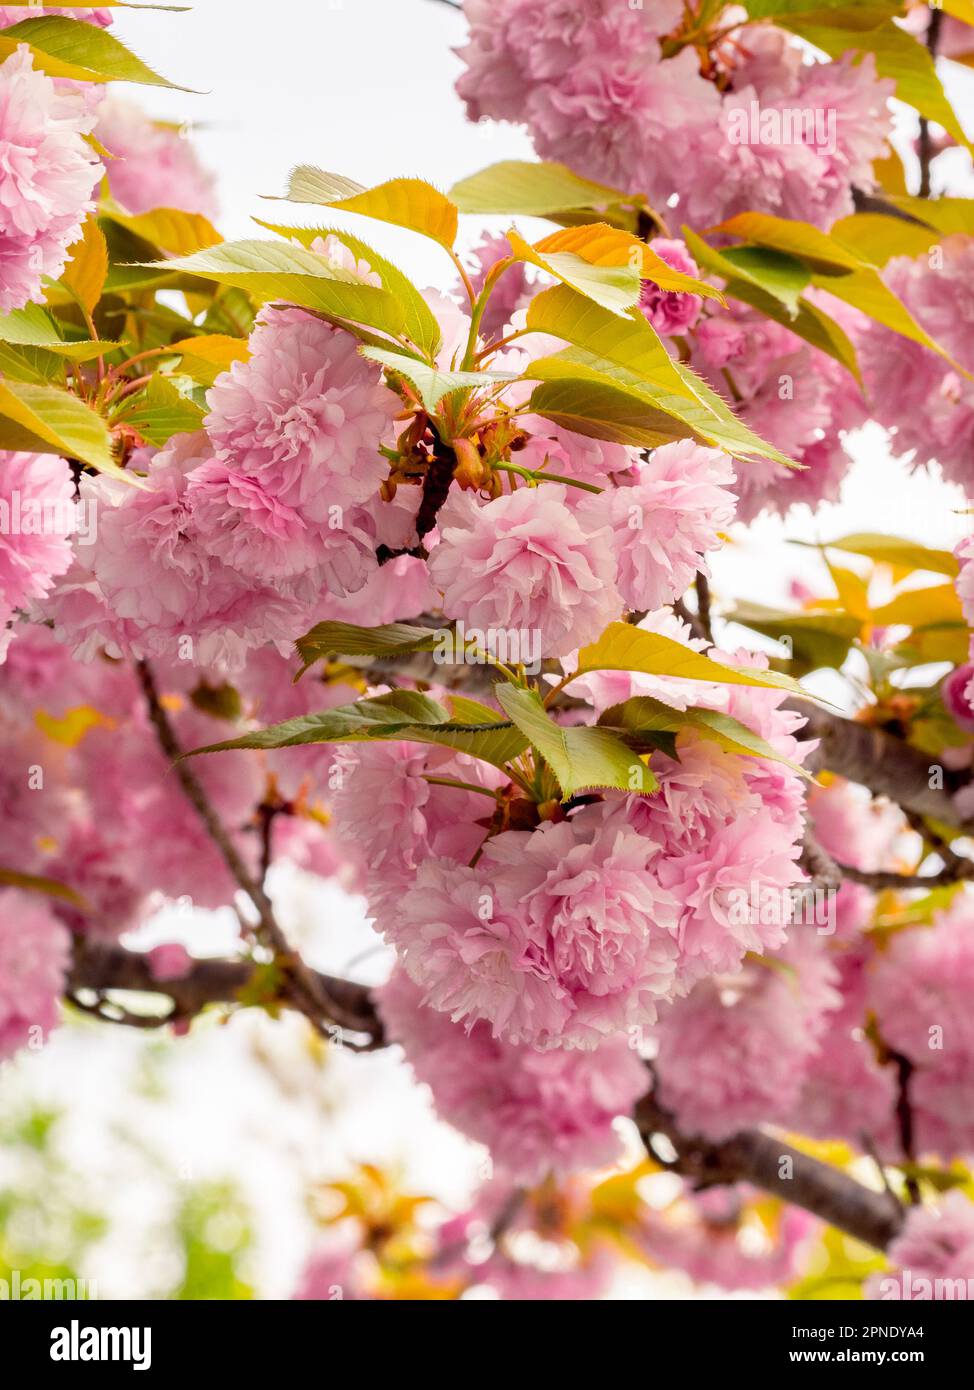 selective focus of a Prunus serrulata 'Kanzan' with pink flowers in spring with blurred backgrounselective focus of a Prunus serrulata 'Kanzan' (Japan Stock Photo